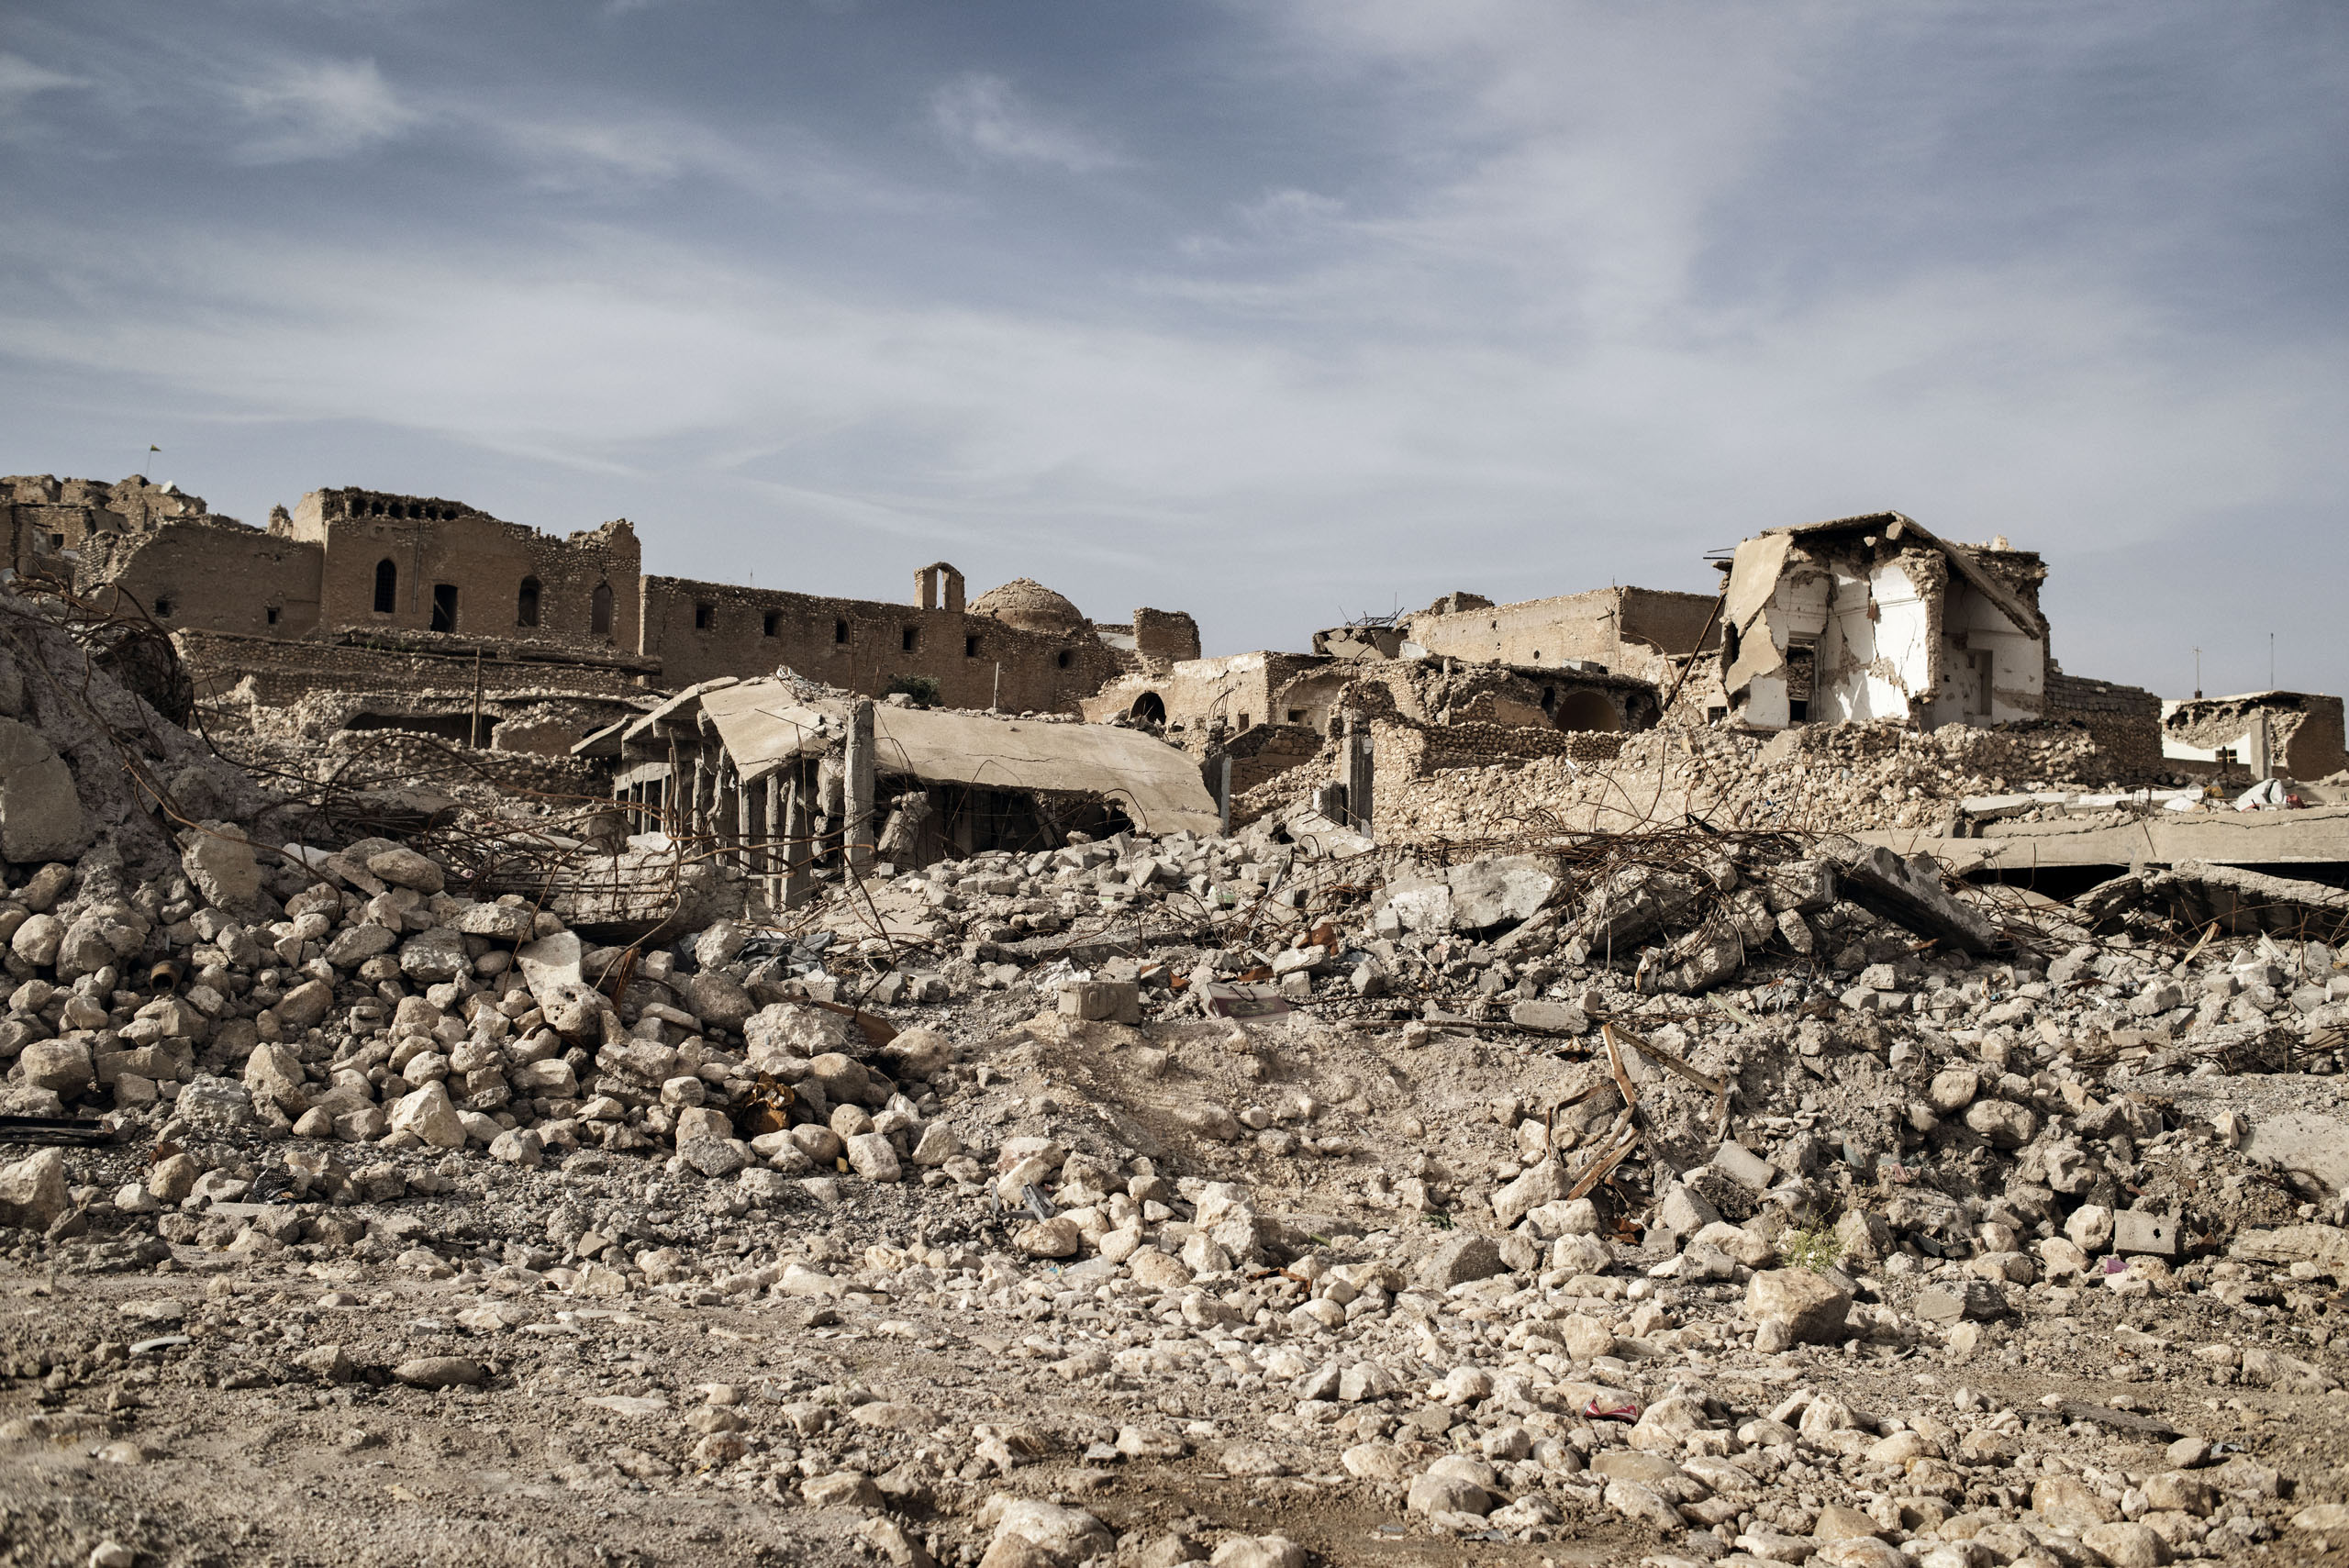 Buildings lay in ruins in the Iraqi town of Sinjar, May 13, 2016. Backed by U.S.-led airstrikes, Kurdish forces retook the town from ISIS in November 2015.